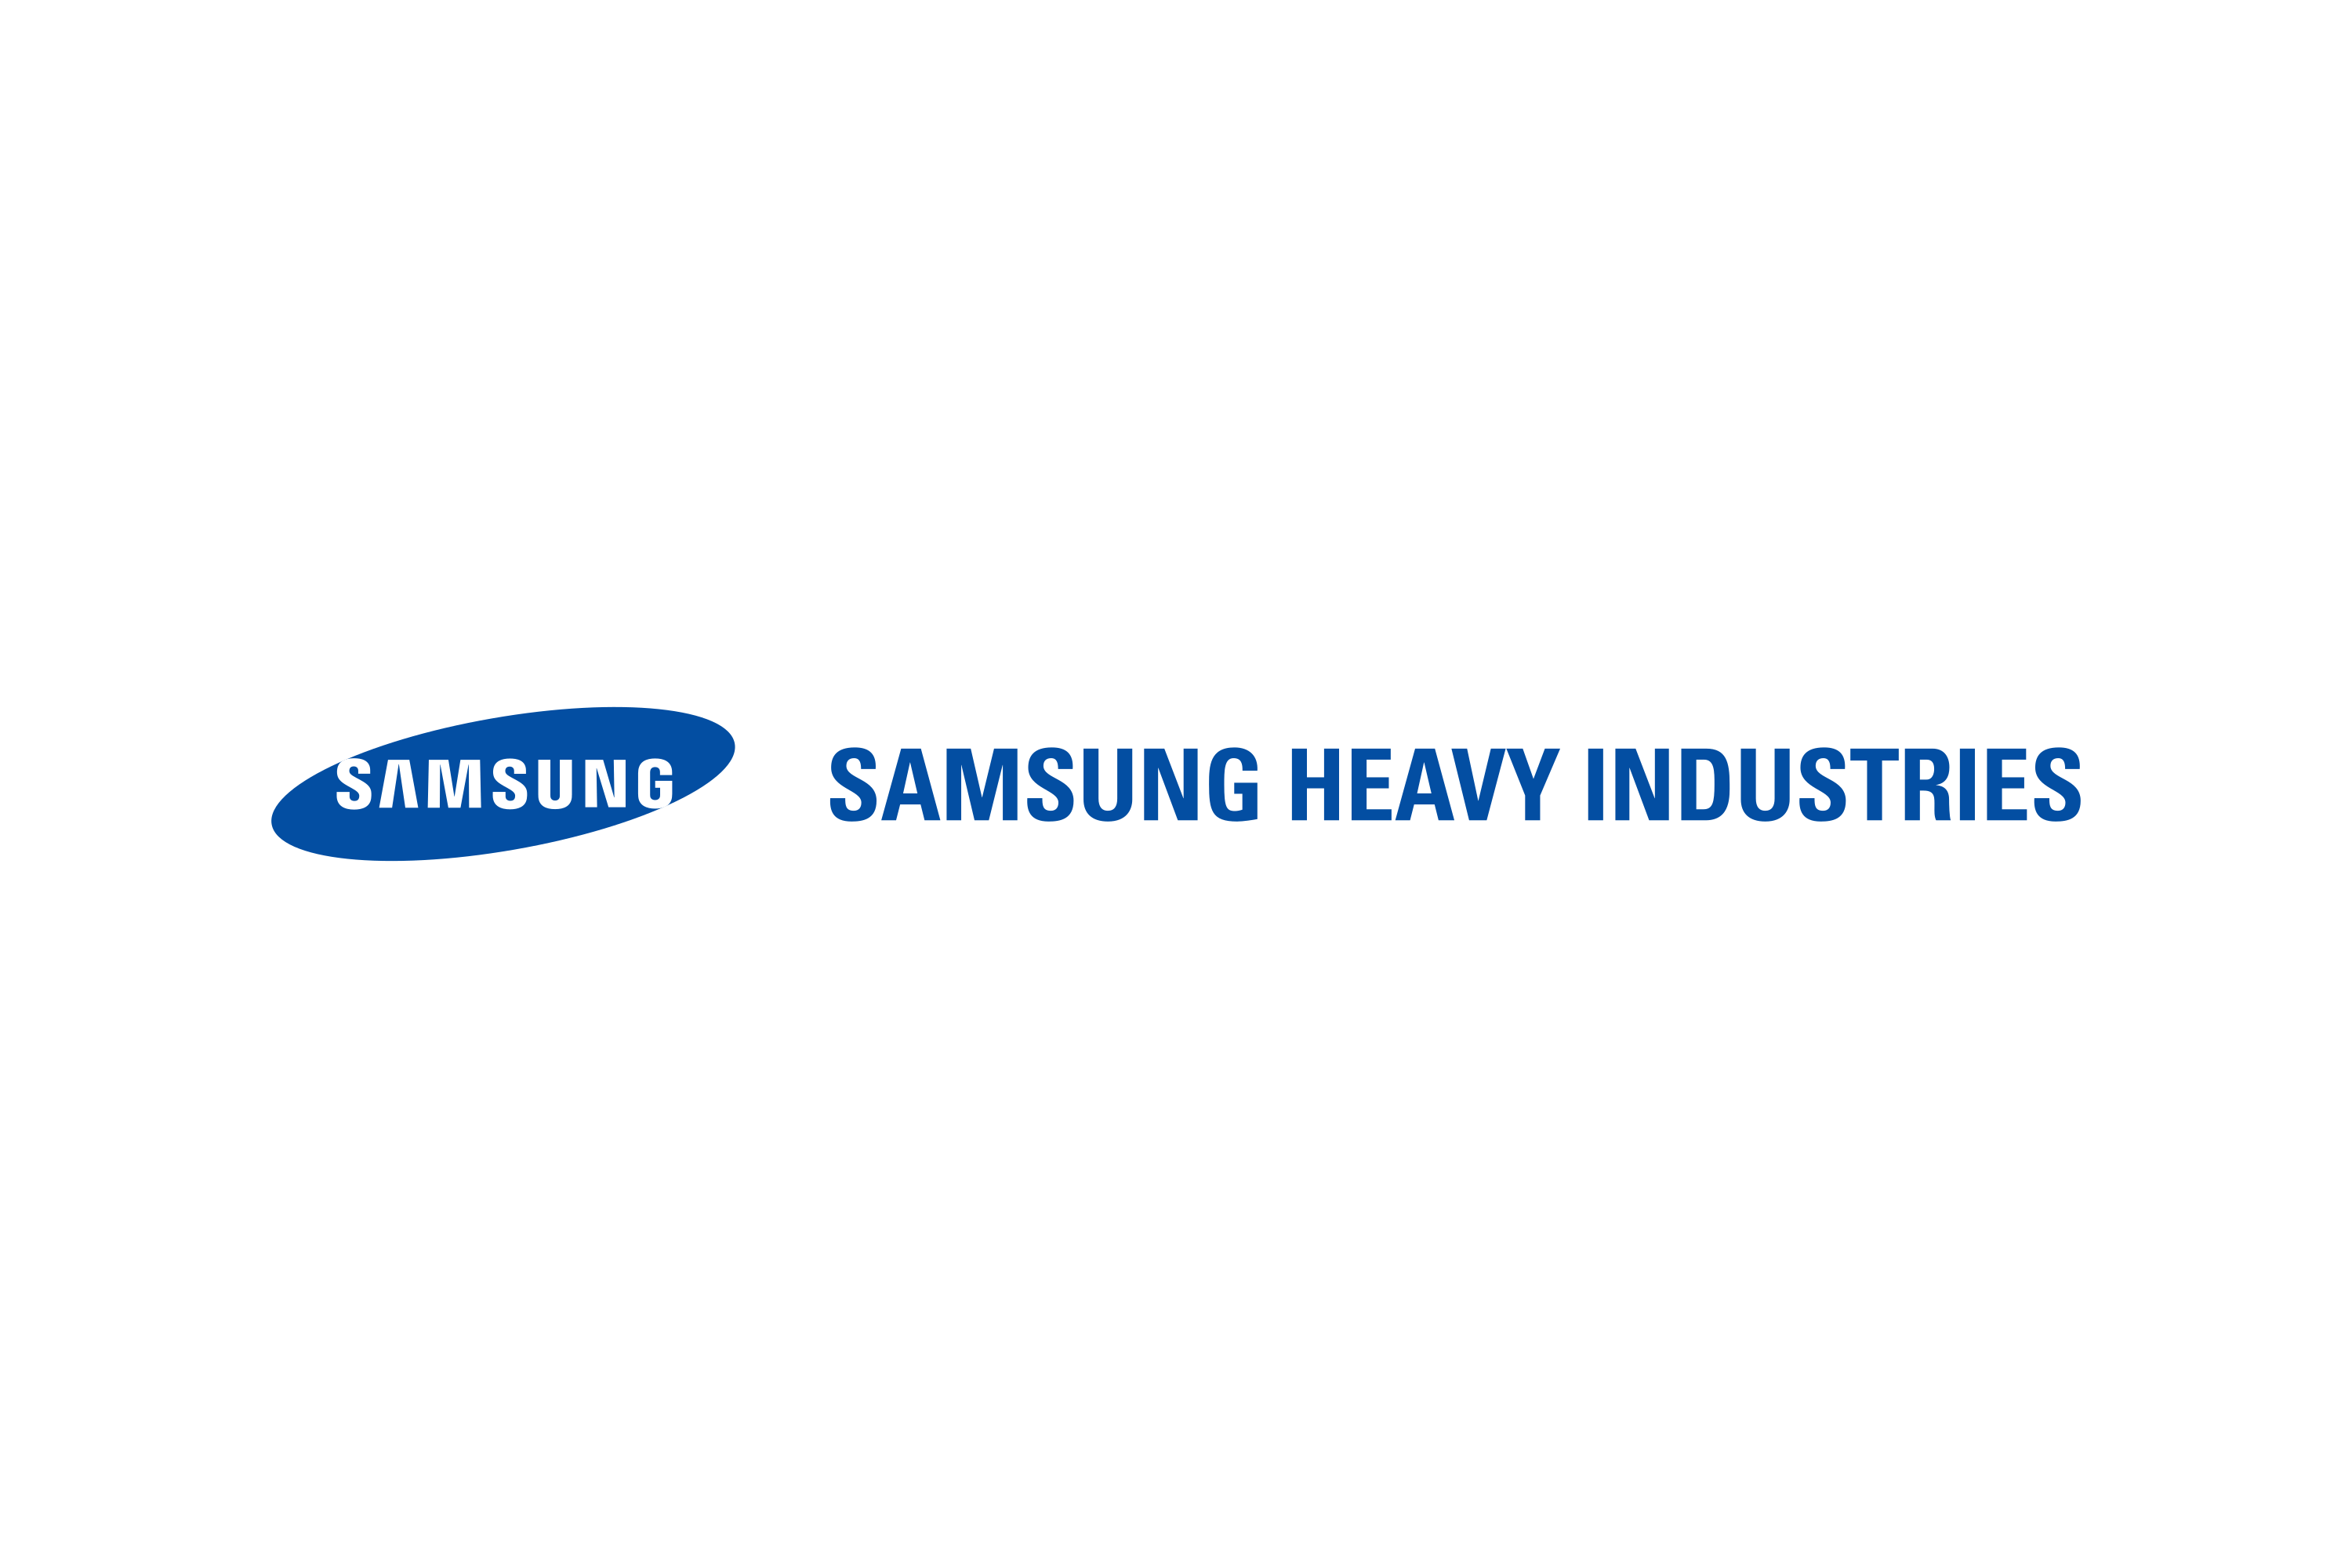 Download Samsung Heavy Industries Logo in SVG Vector or PNG File ...